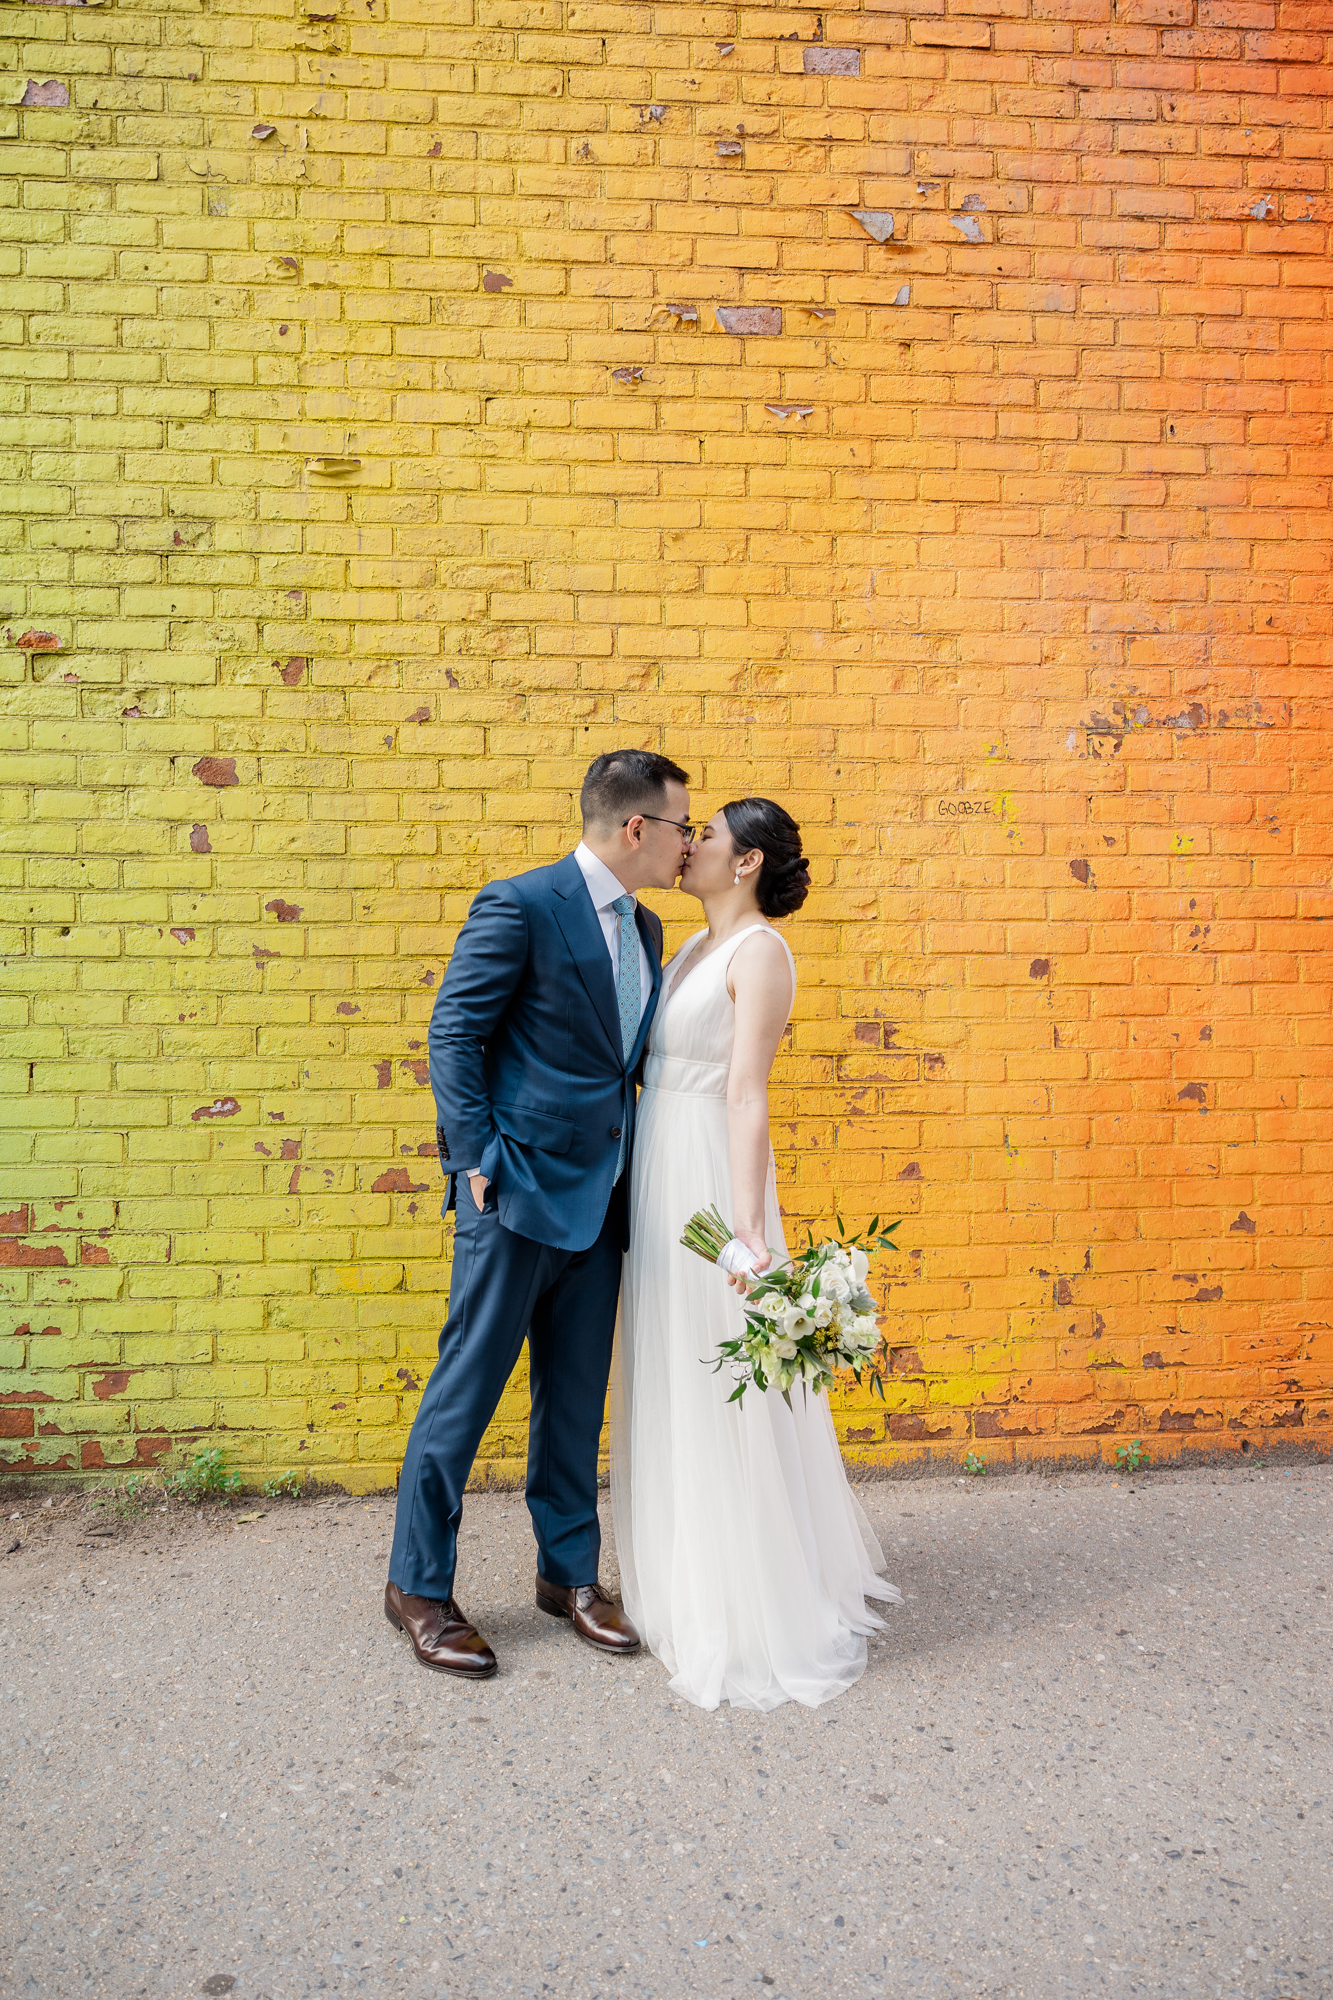 Lovely Photos of New York Elopement in DUMBO and Central Park